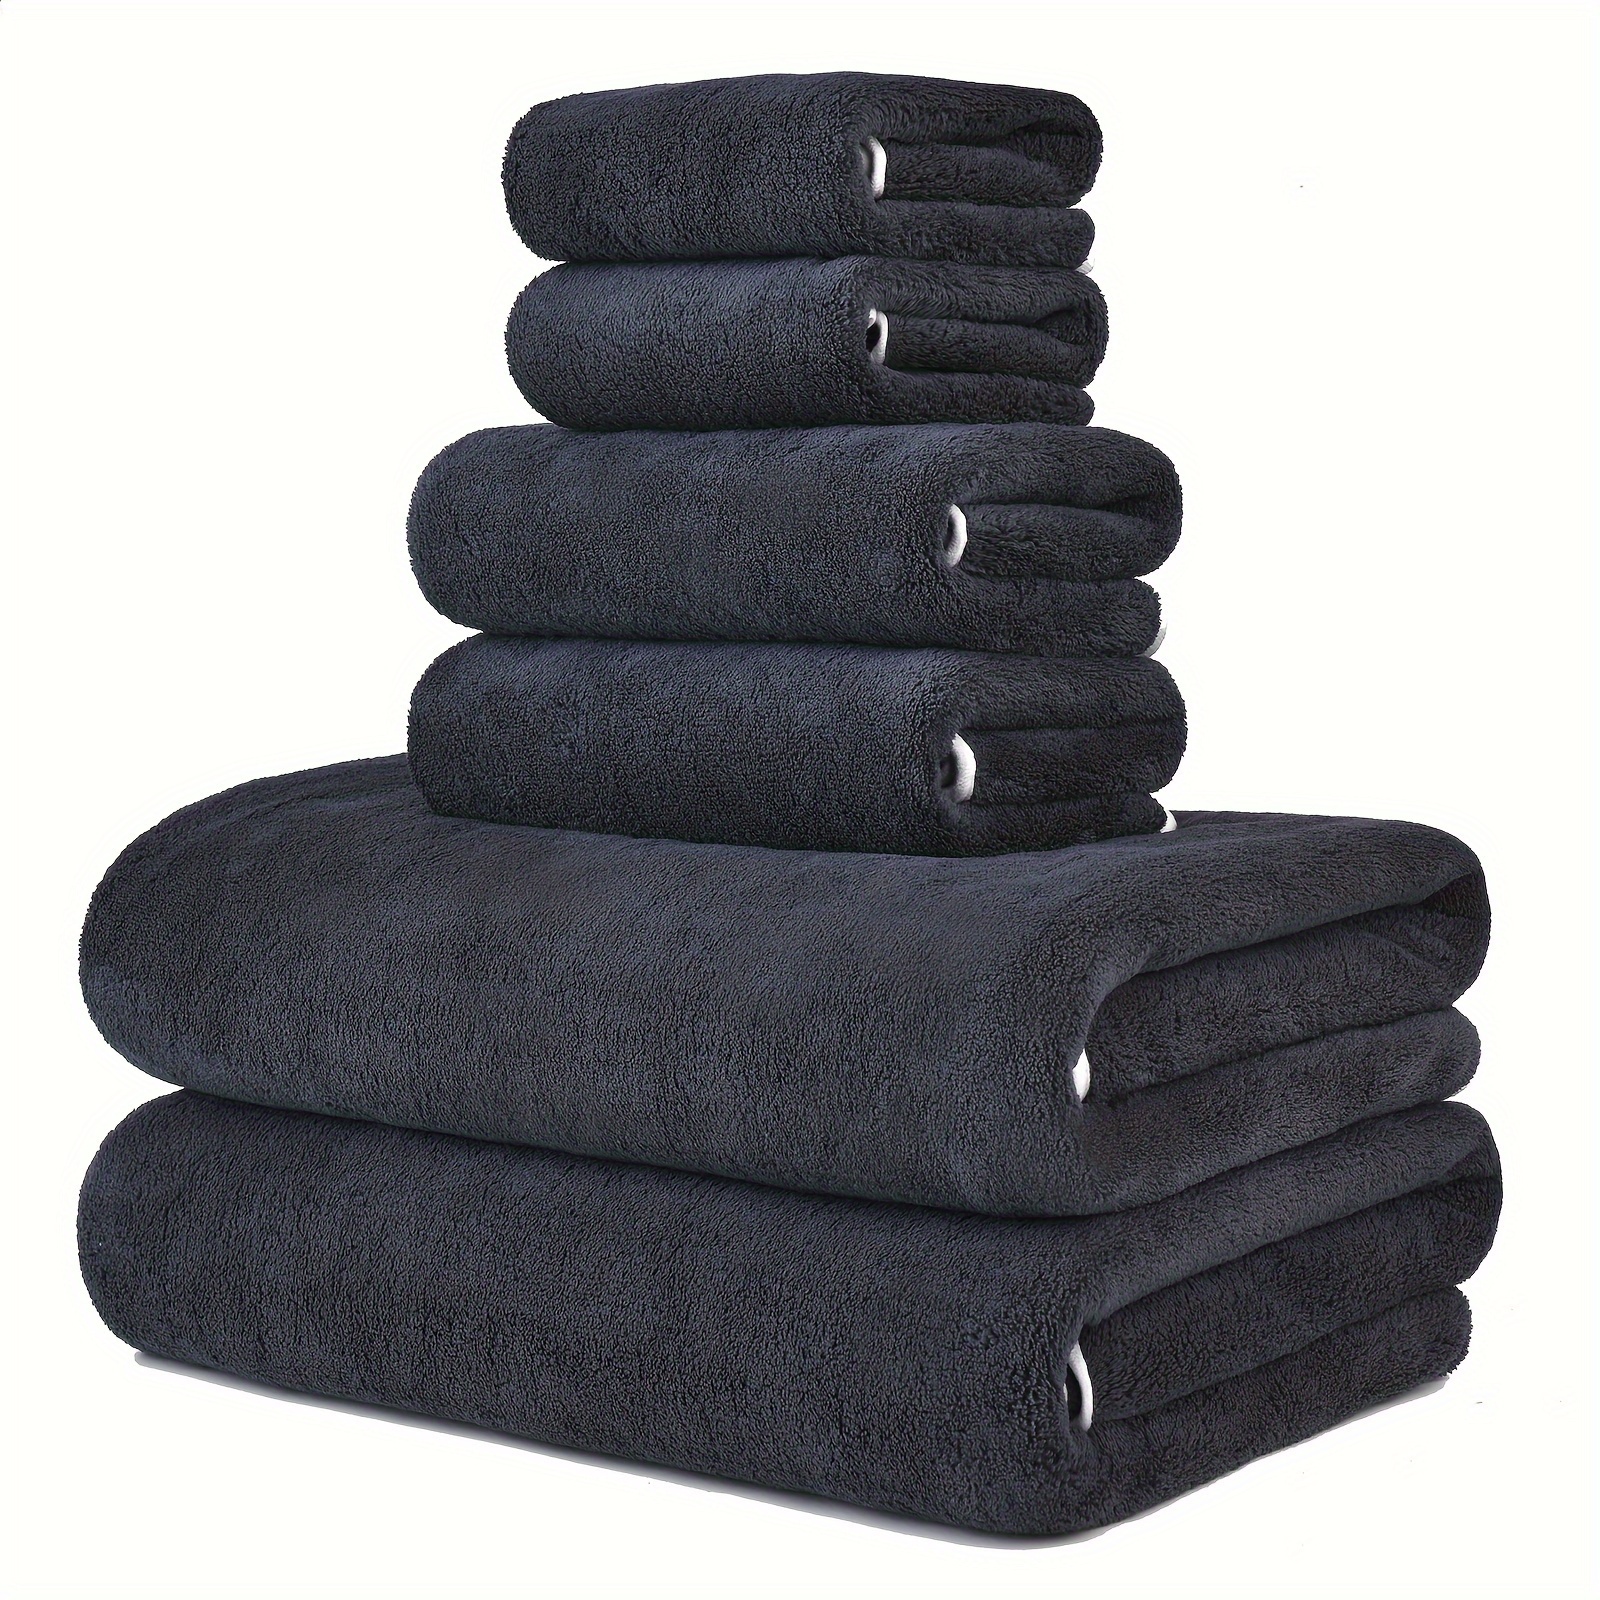 

6-piece Modern Microfiber Towel Set, Includes 2 Bath Towels (27x55in), 2 Hand Towels (13x30in), 2 Washcloths (13.7x13.7in), Quick-dry, Ultra-absorbent, Lightweight